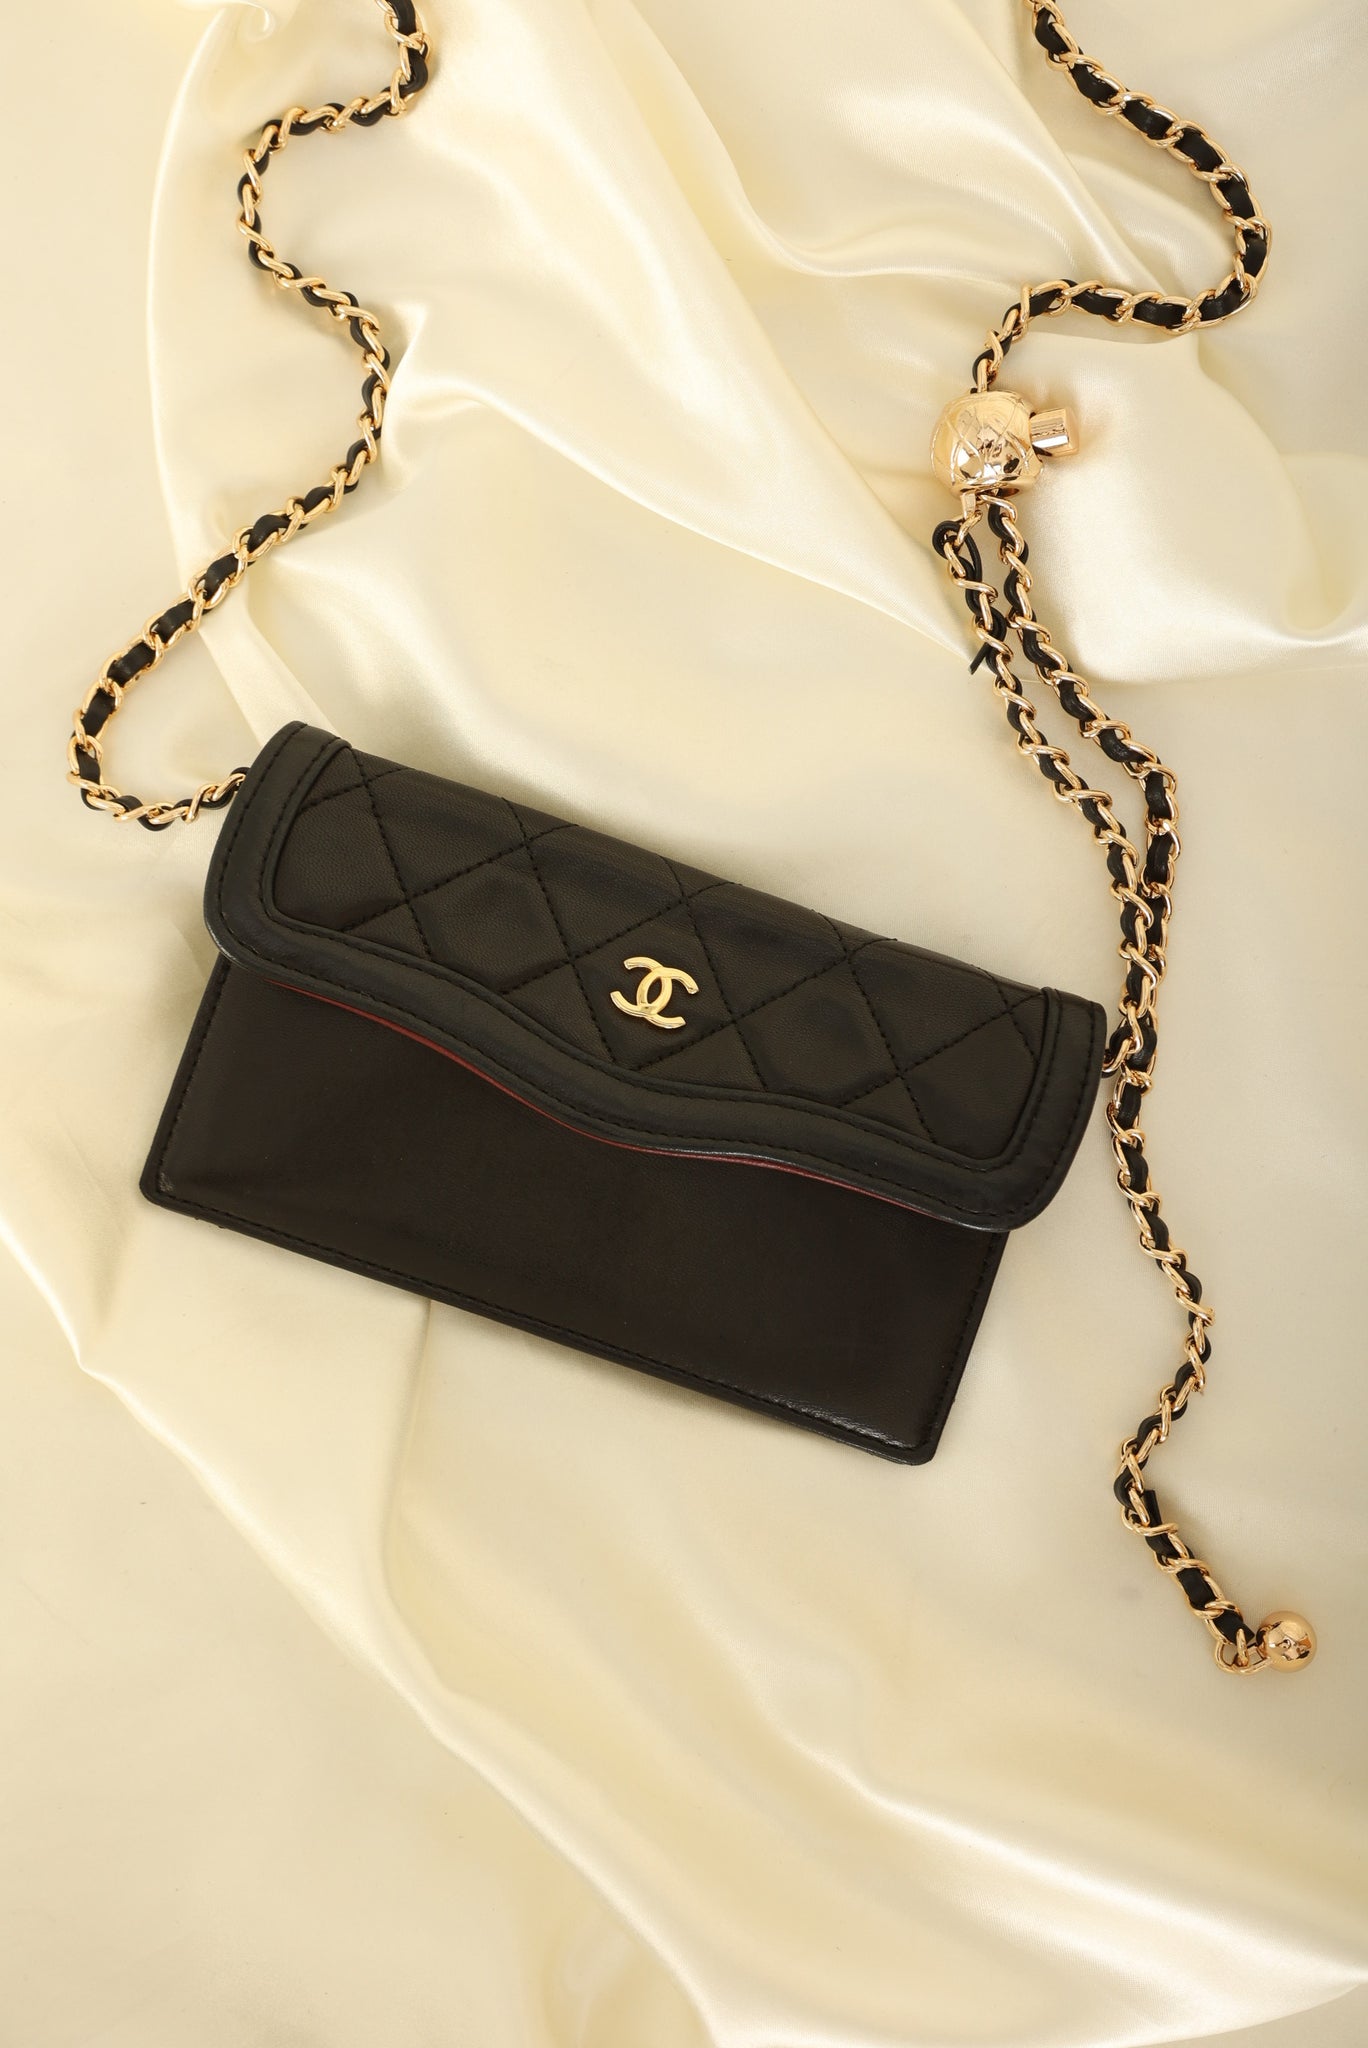 Extremely Rare Chanel 1989 Lambskin Trapezoid Flap with Wallet